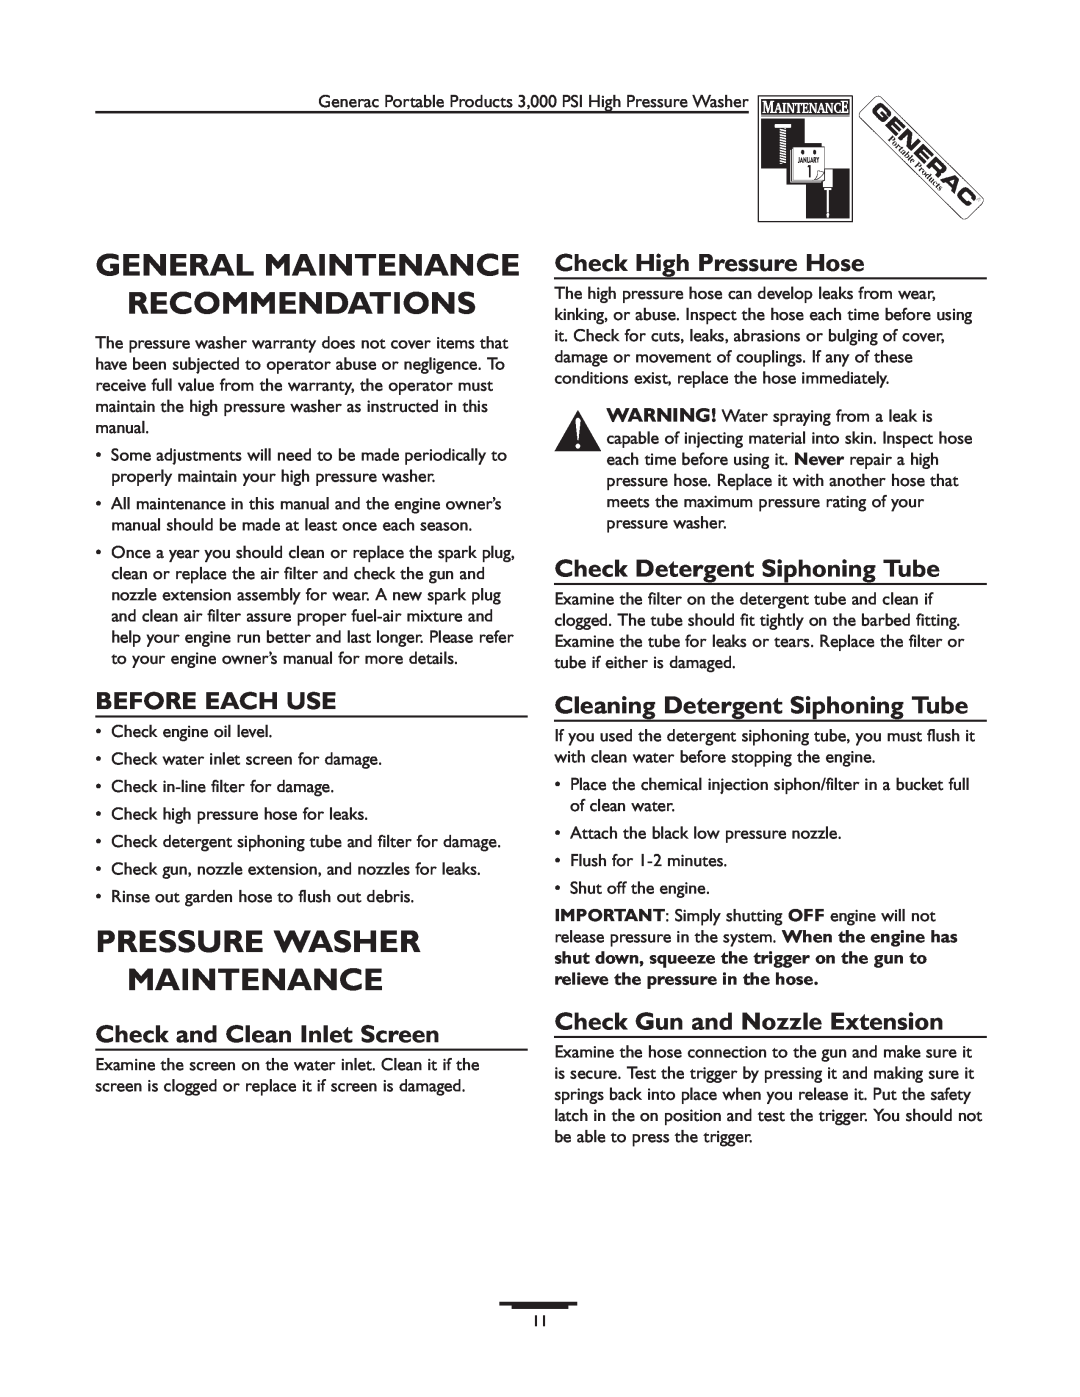 Generac 1418-0 General Maintenance Recommendations, Pressure Washer Maintenance, Check High Pressure Hose, Before Each Use 